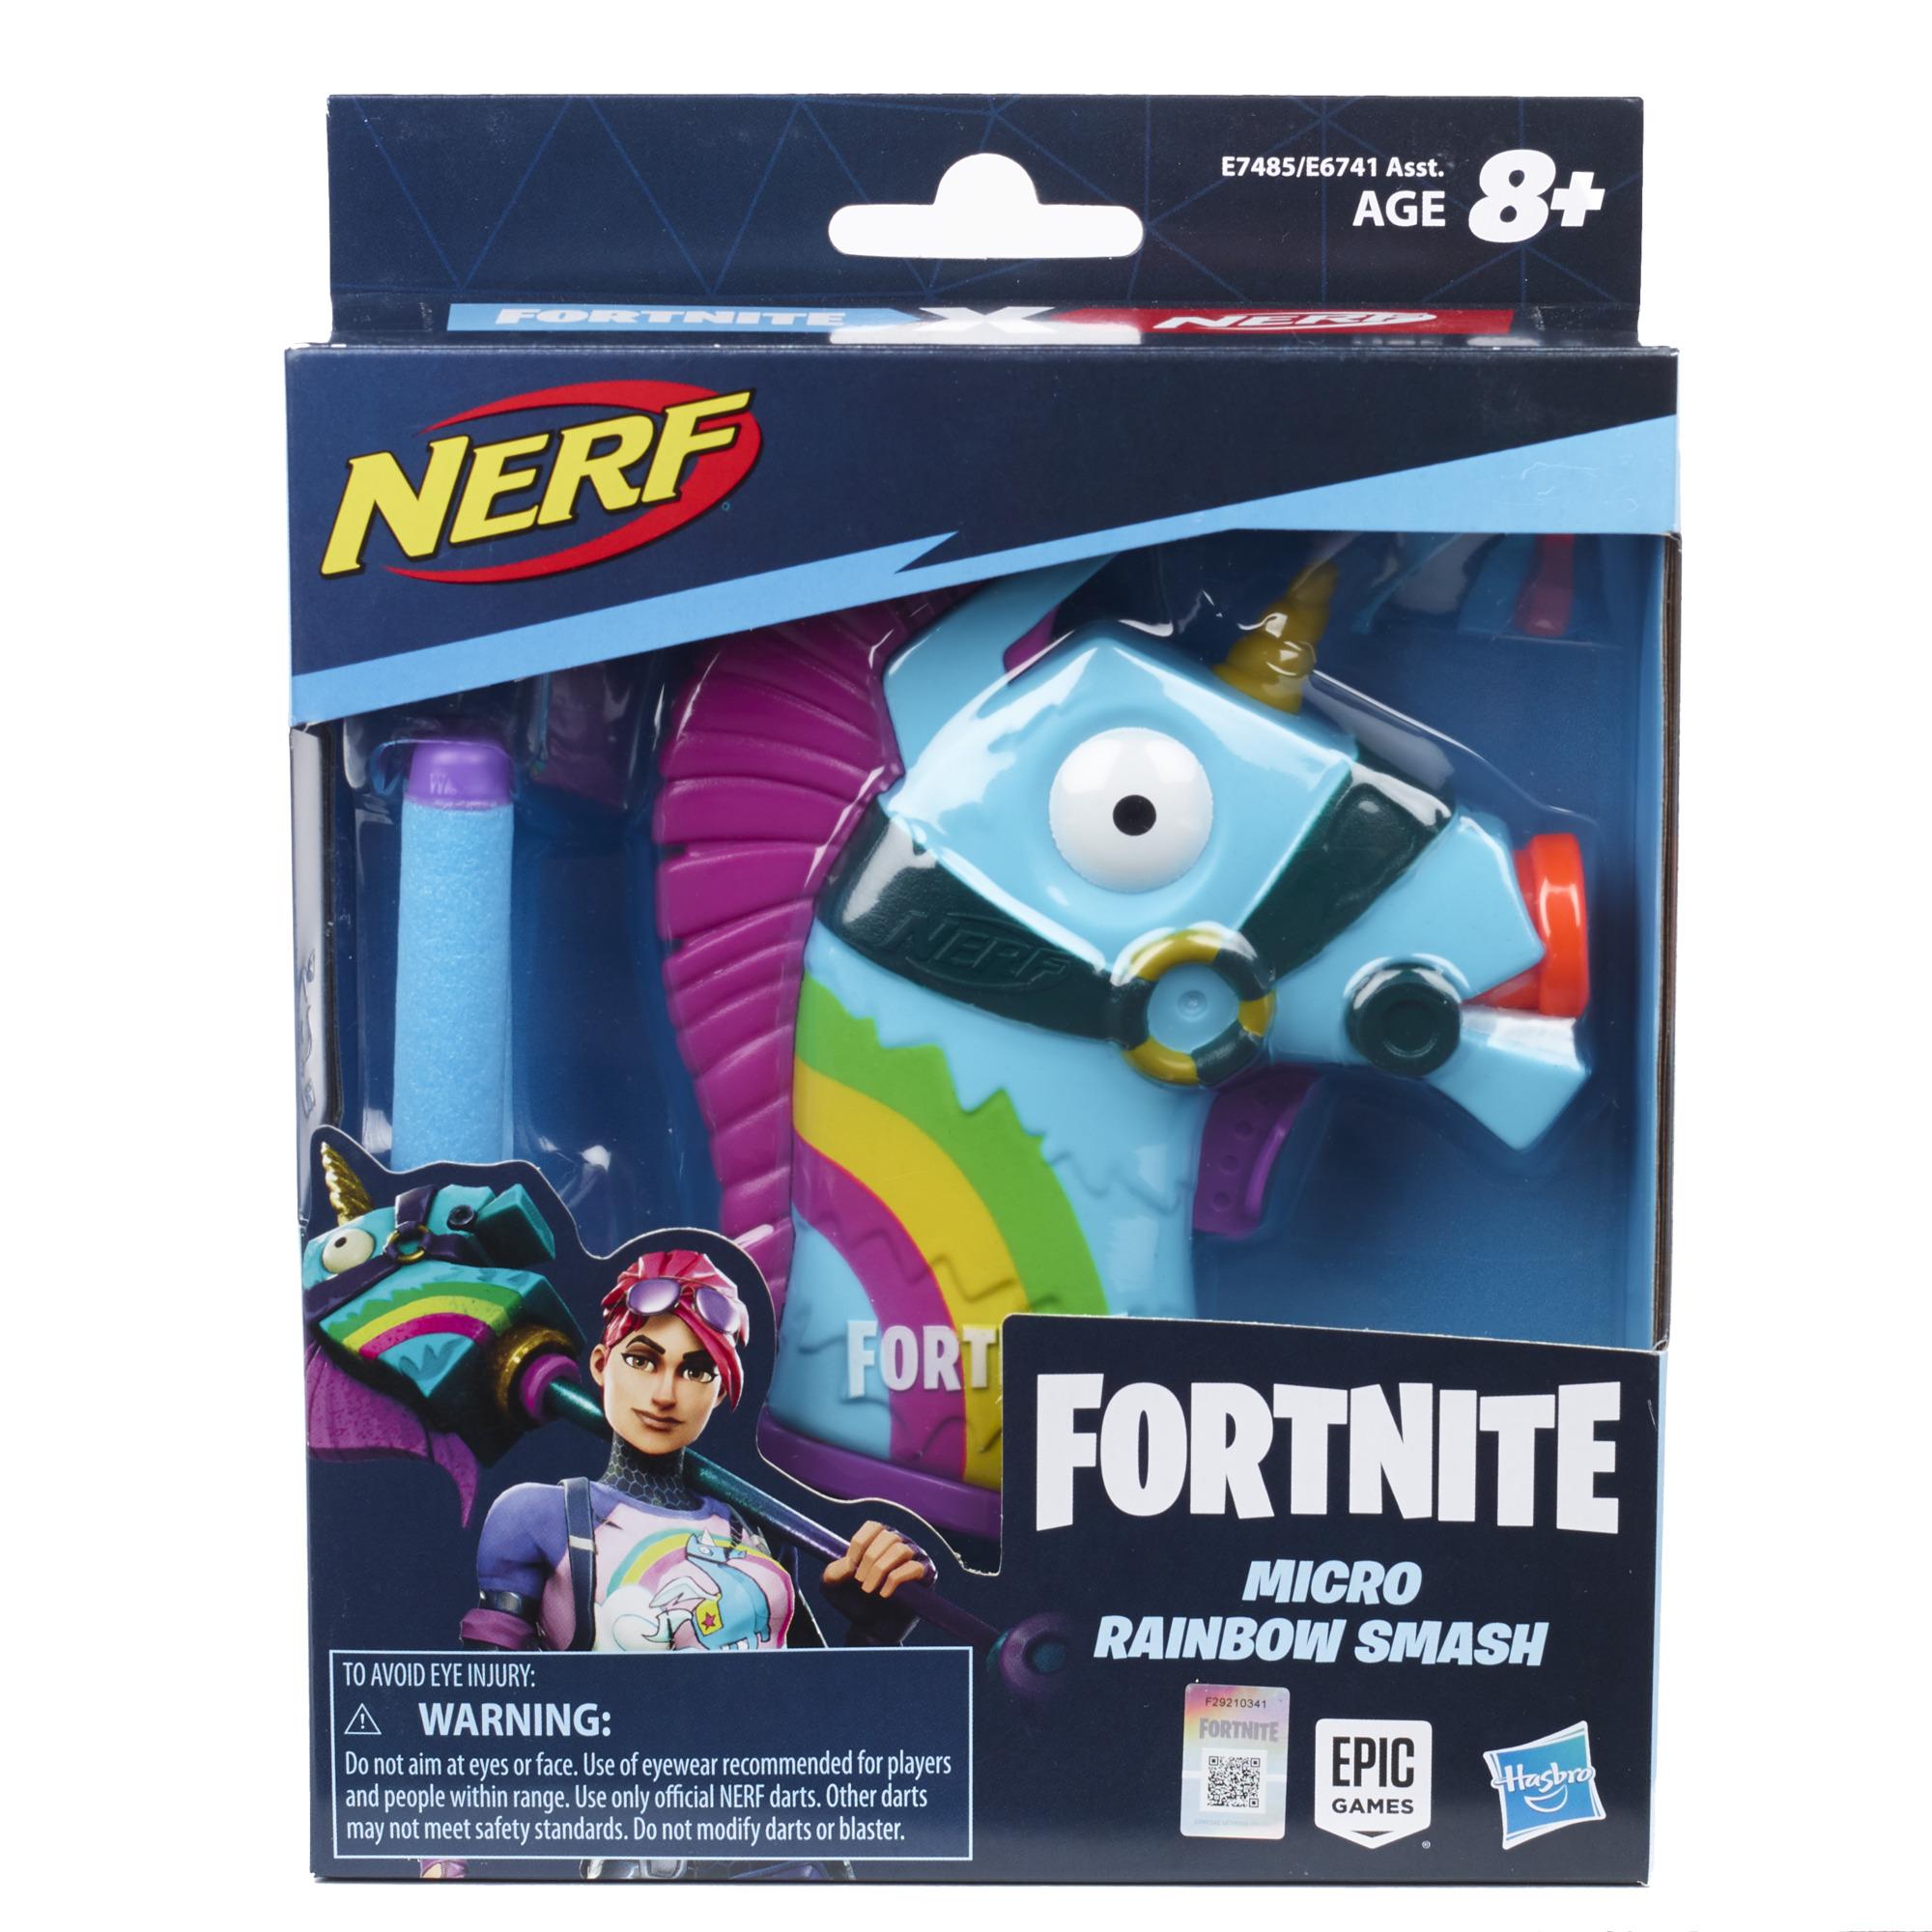 Nerf MicroShots Fortnite Rainbow Smash -- Mini Dart Blaster and 2 Official Nerf Elite Darts -- For Youth, Teens, Adults